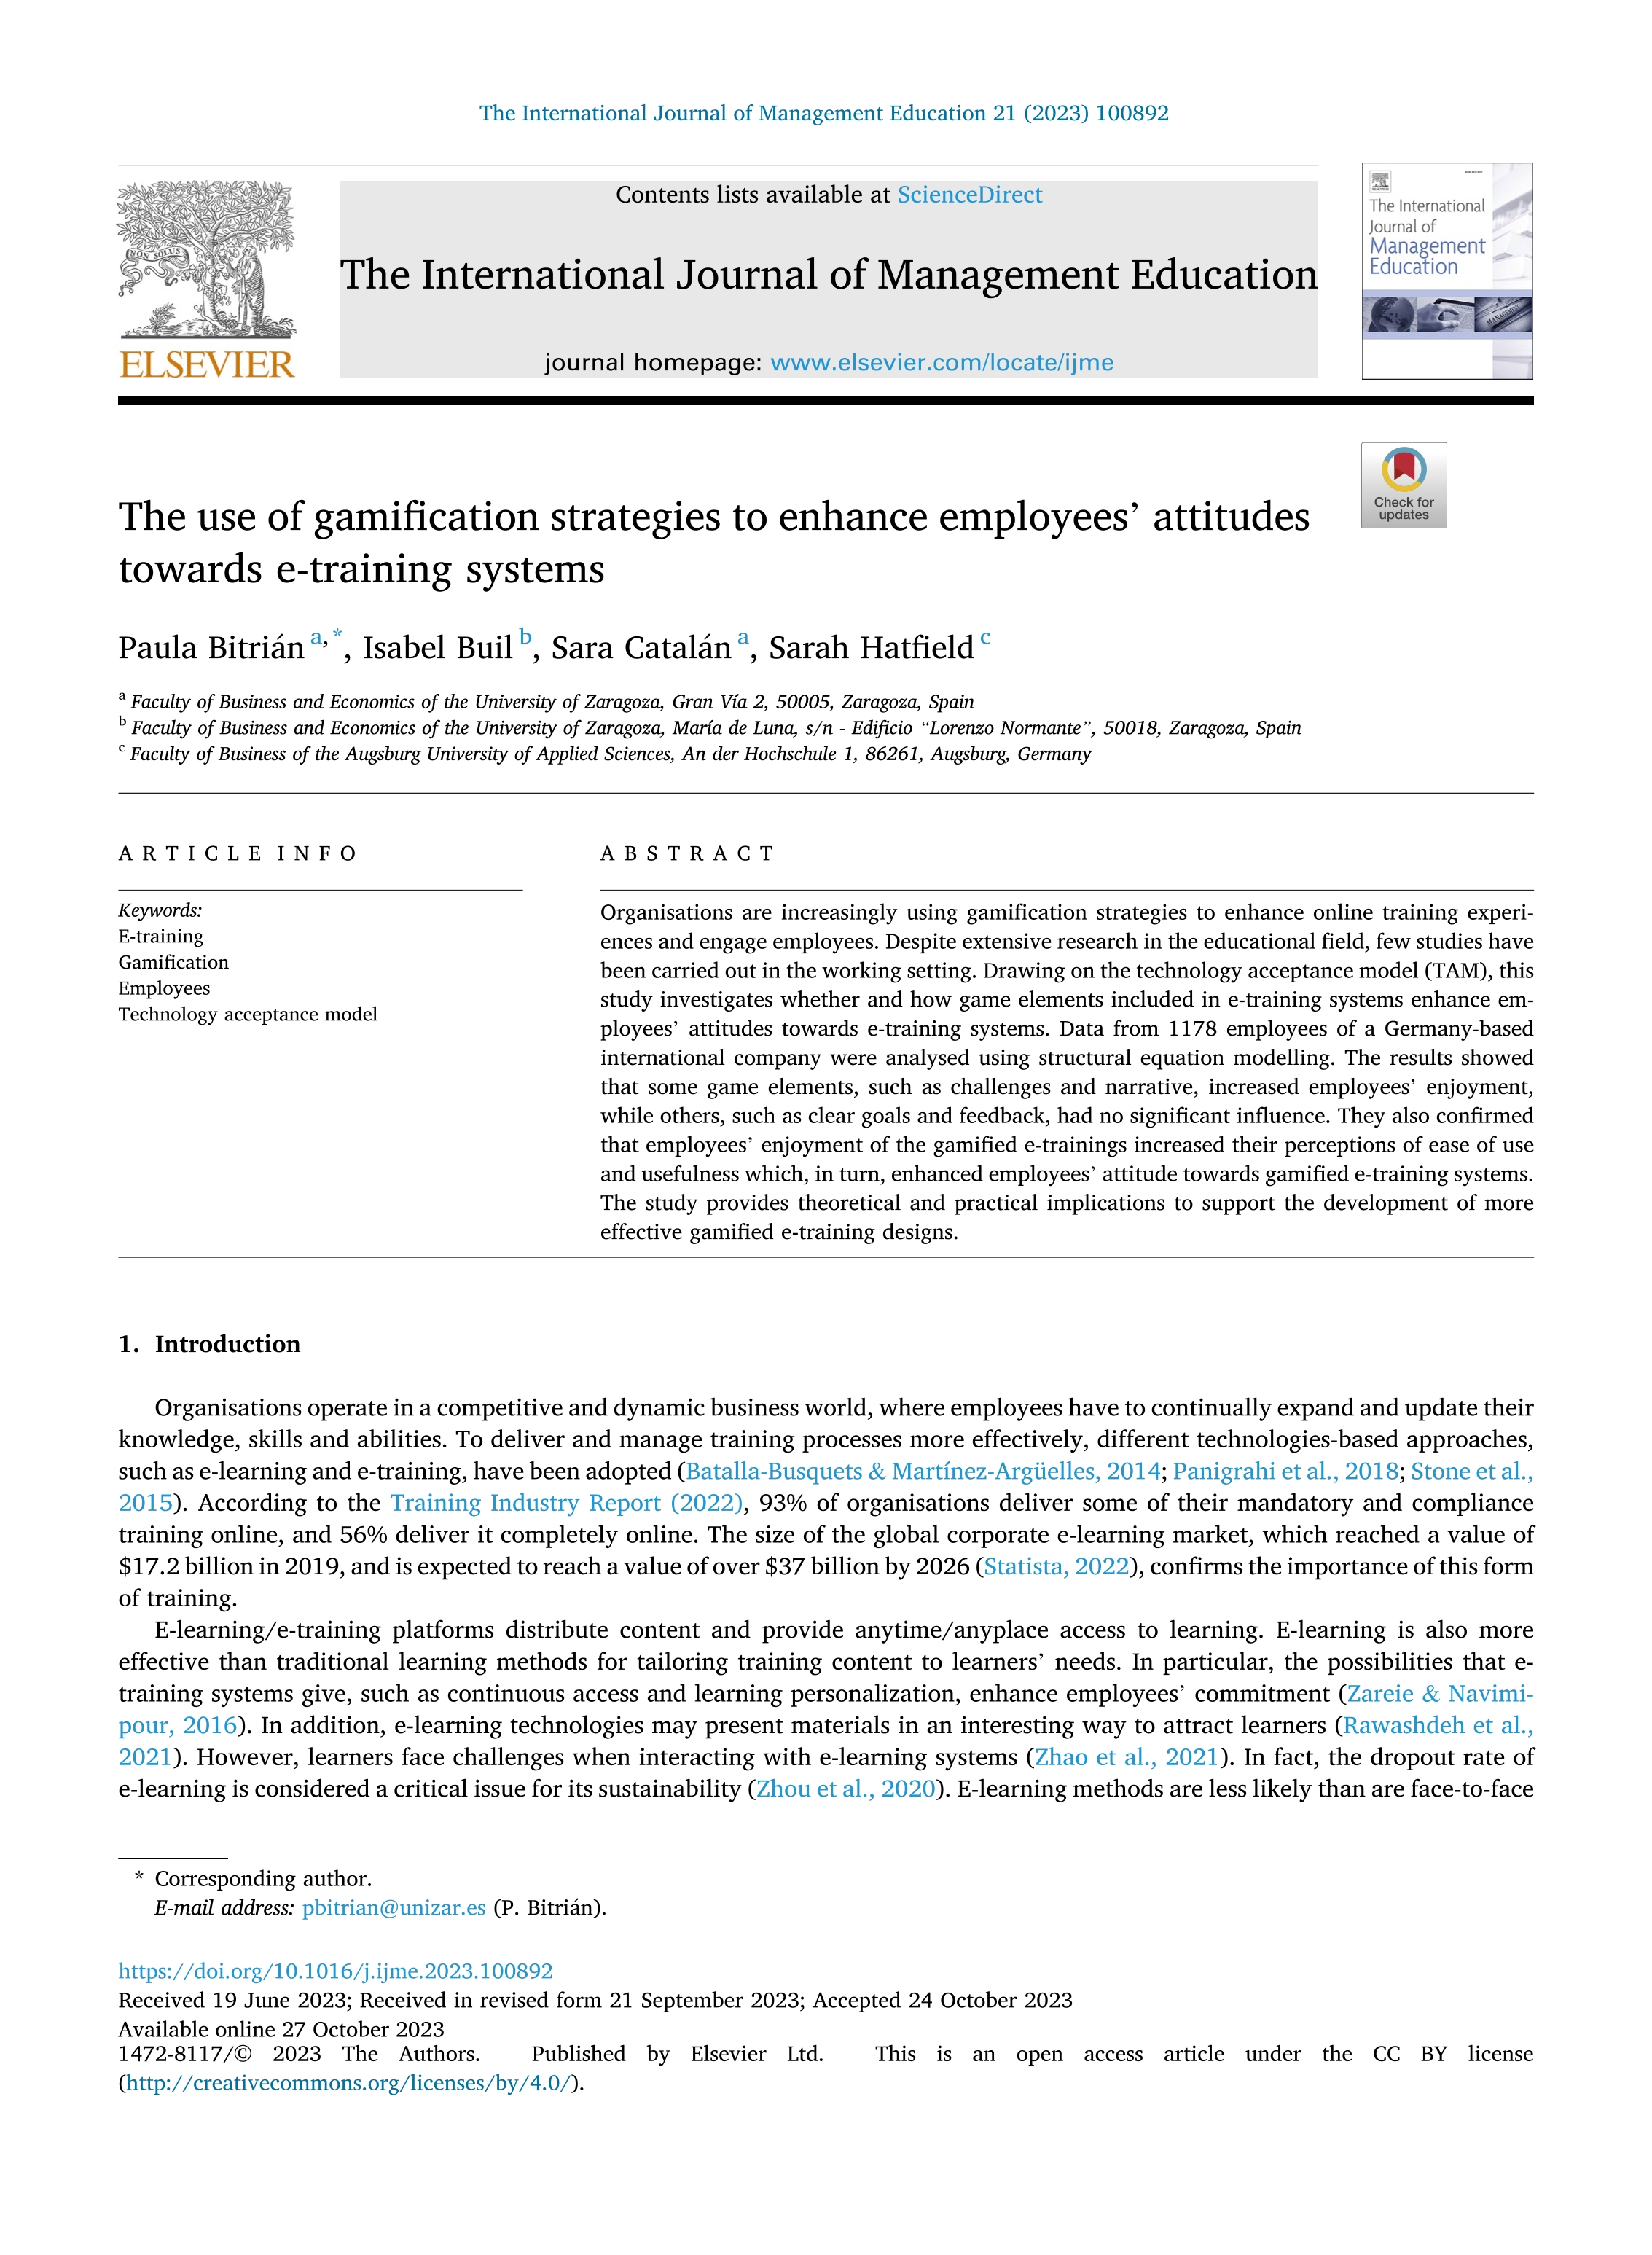 The use of gamification strategies to enhance employees’ attitudes towards e-training systems